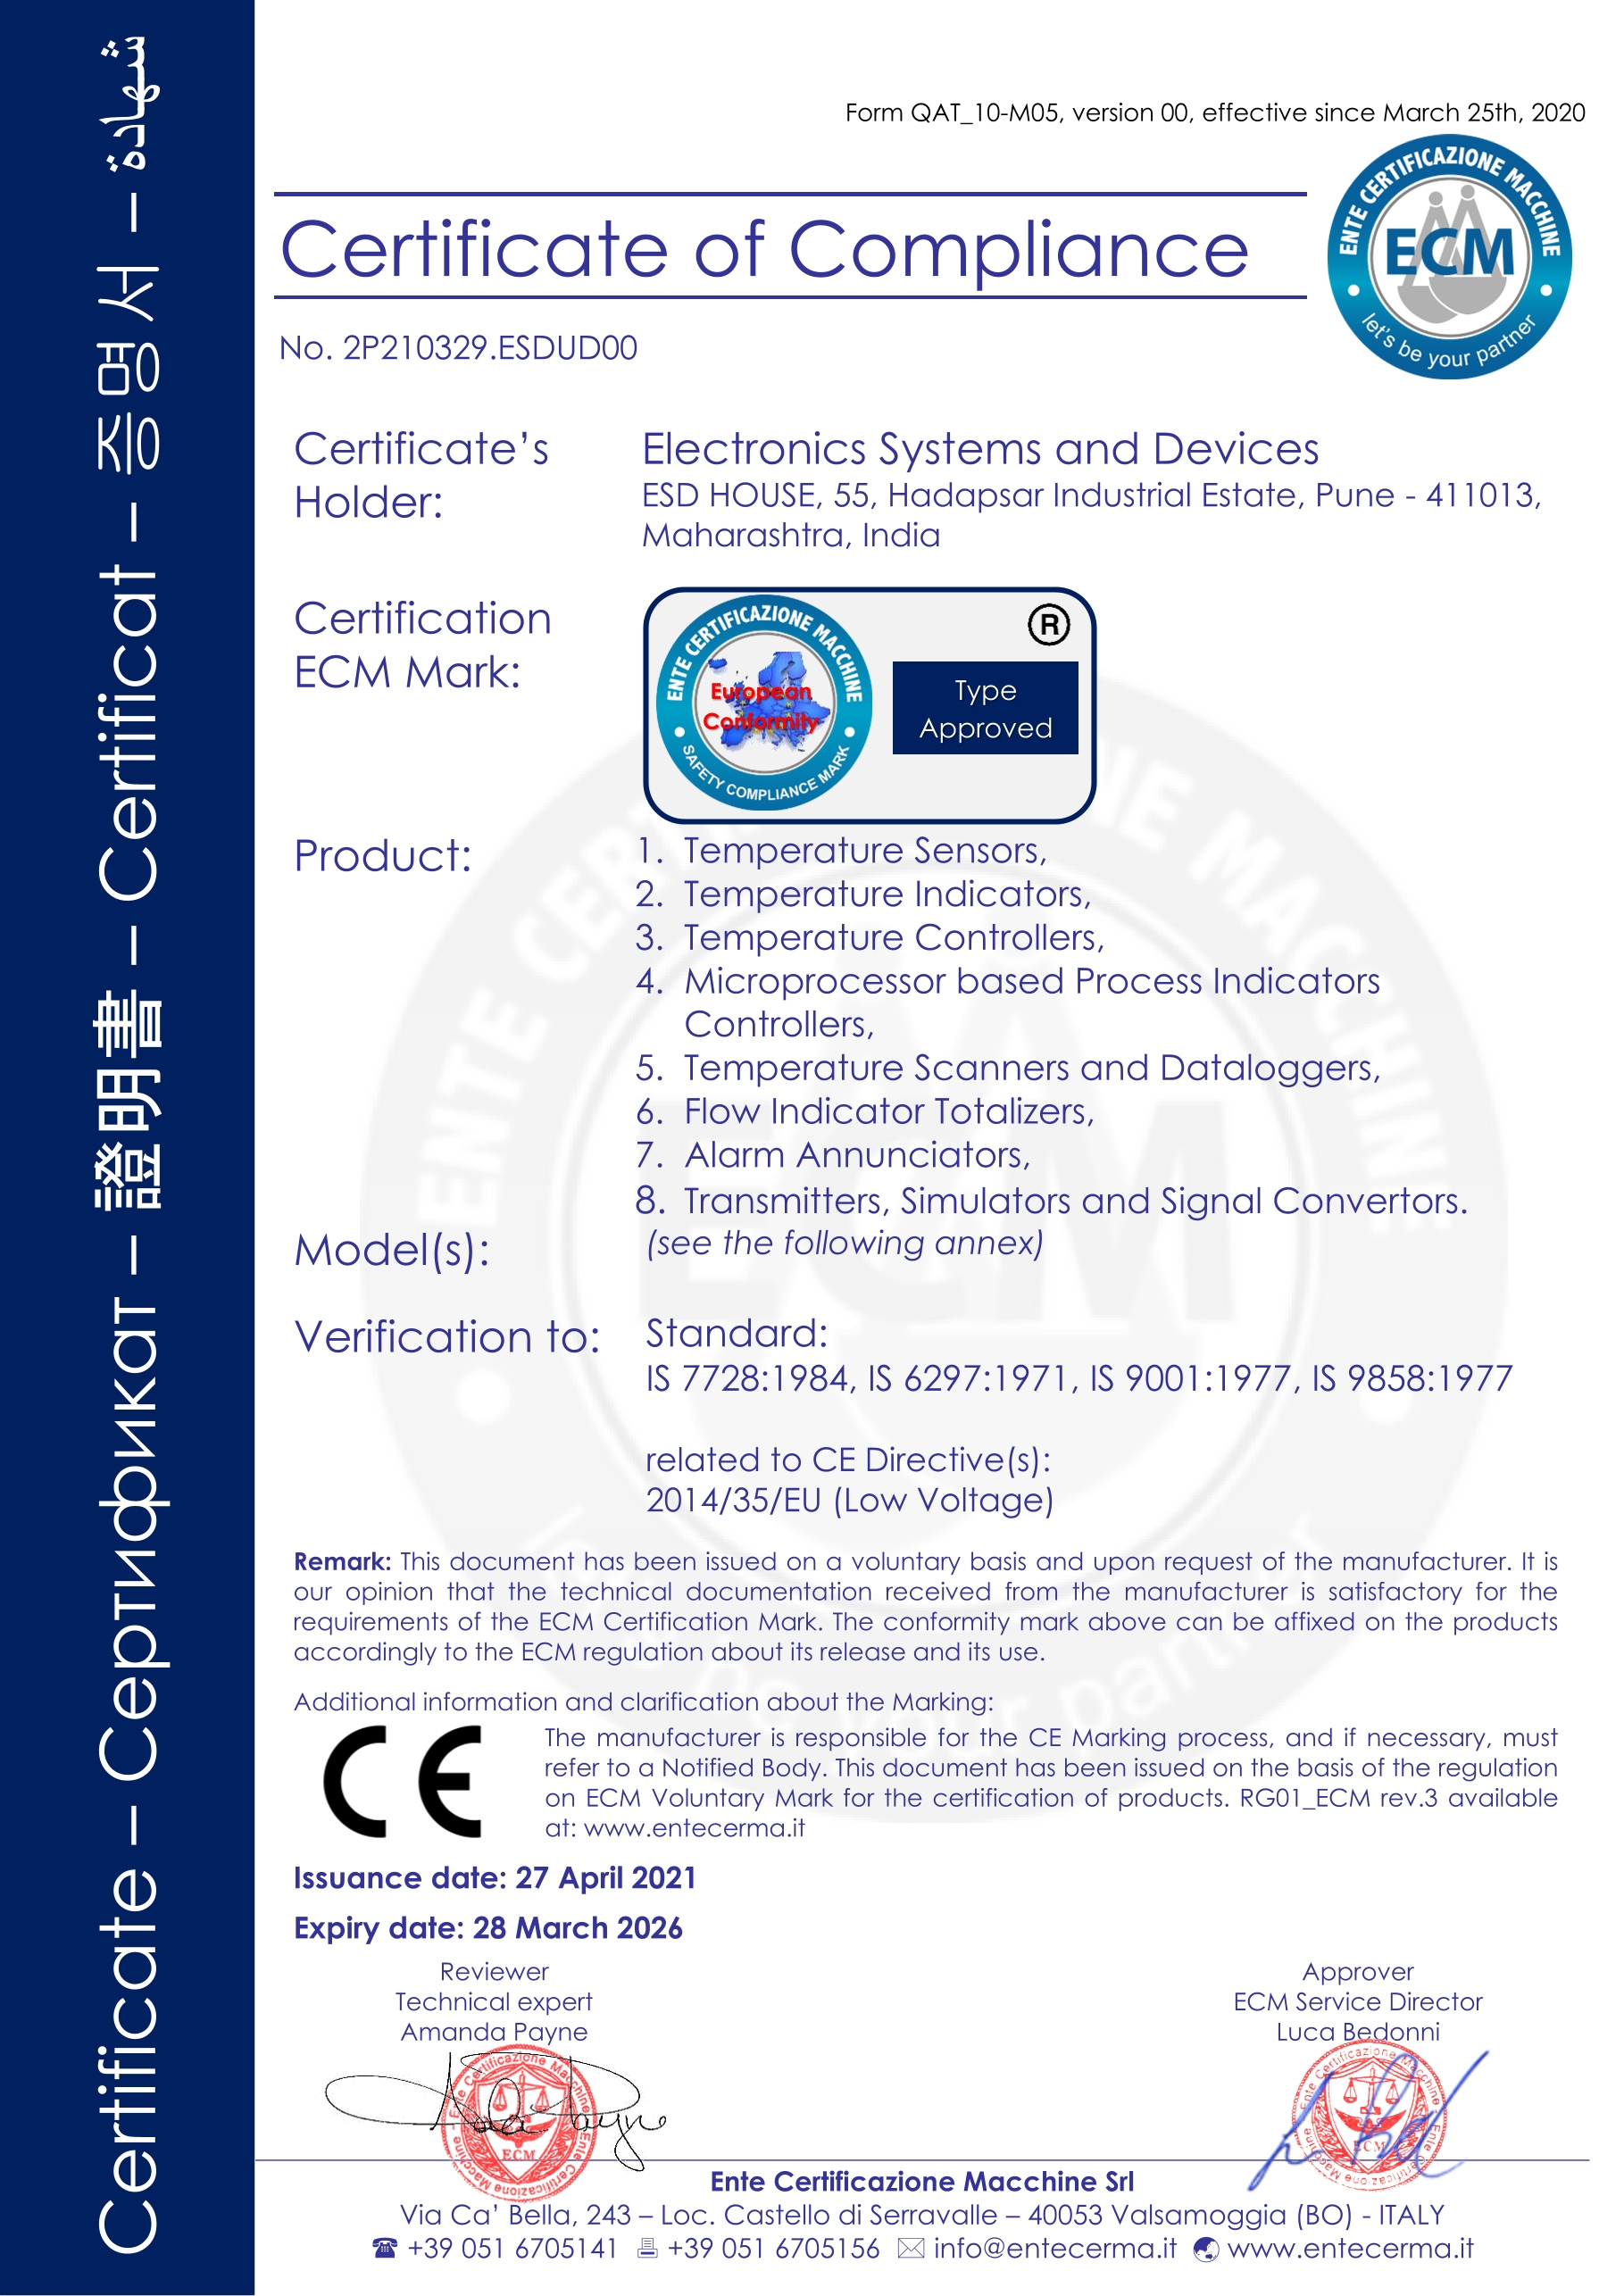 ESD ISO certificate